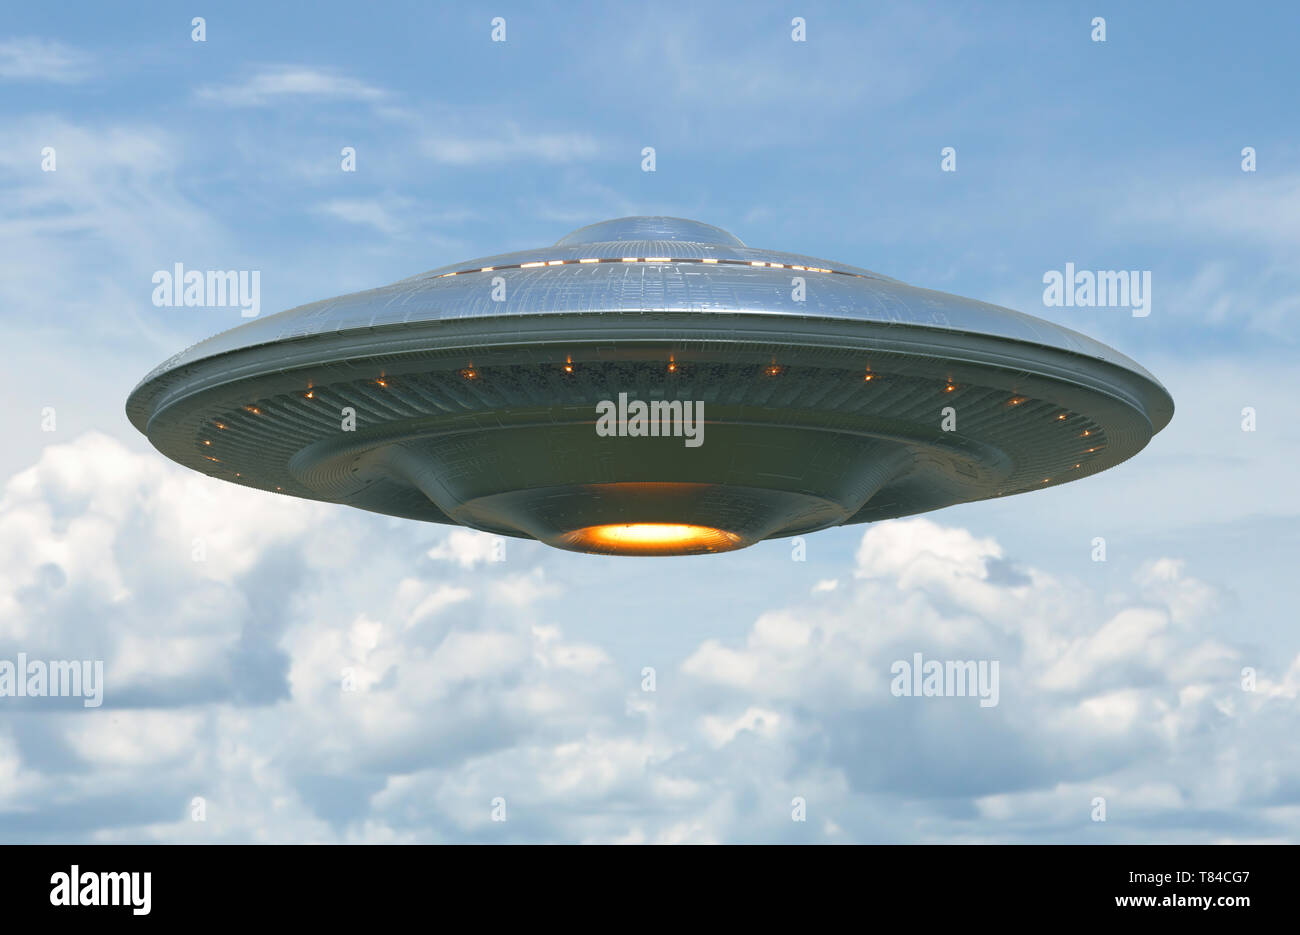 Unidentified flying object on light blue neutral background. Image with clipping path included. Stock Photo